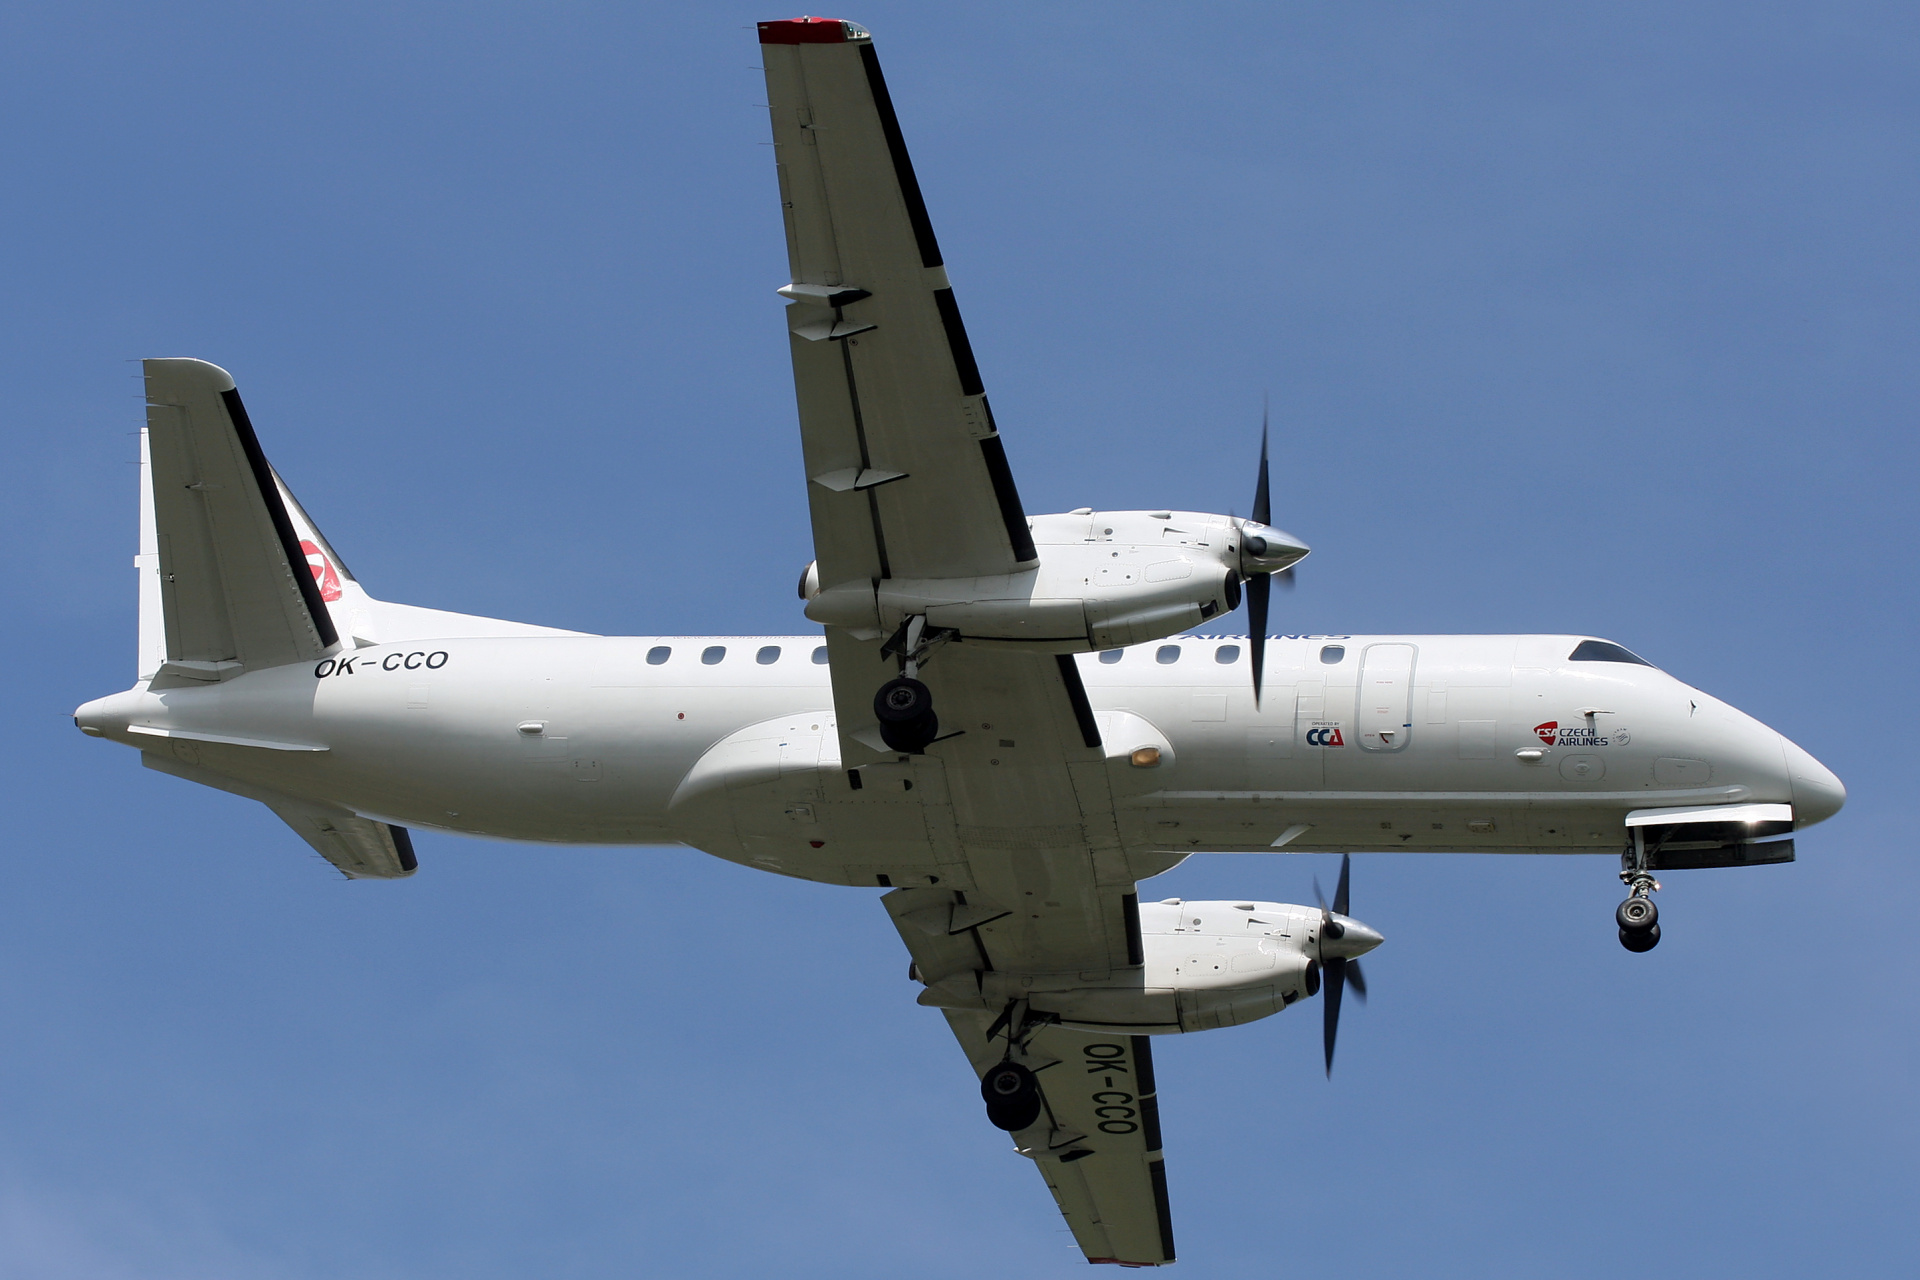 OK-CCO, CSA Czech Airlines (Central Connect Airlines) (Aircraft » EPWA Spotting » Saab 340 » 340B)